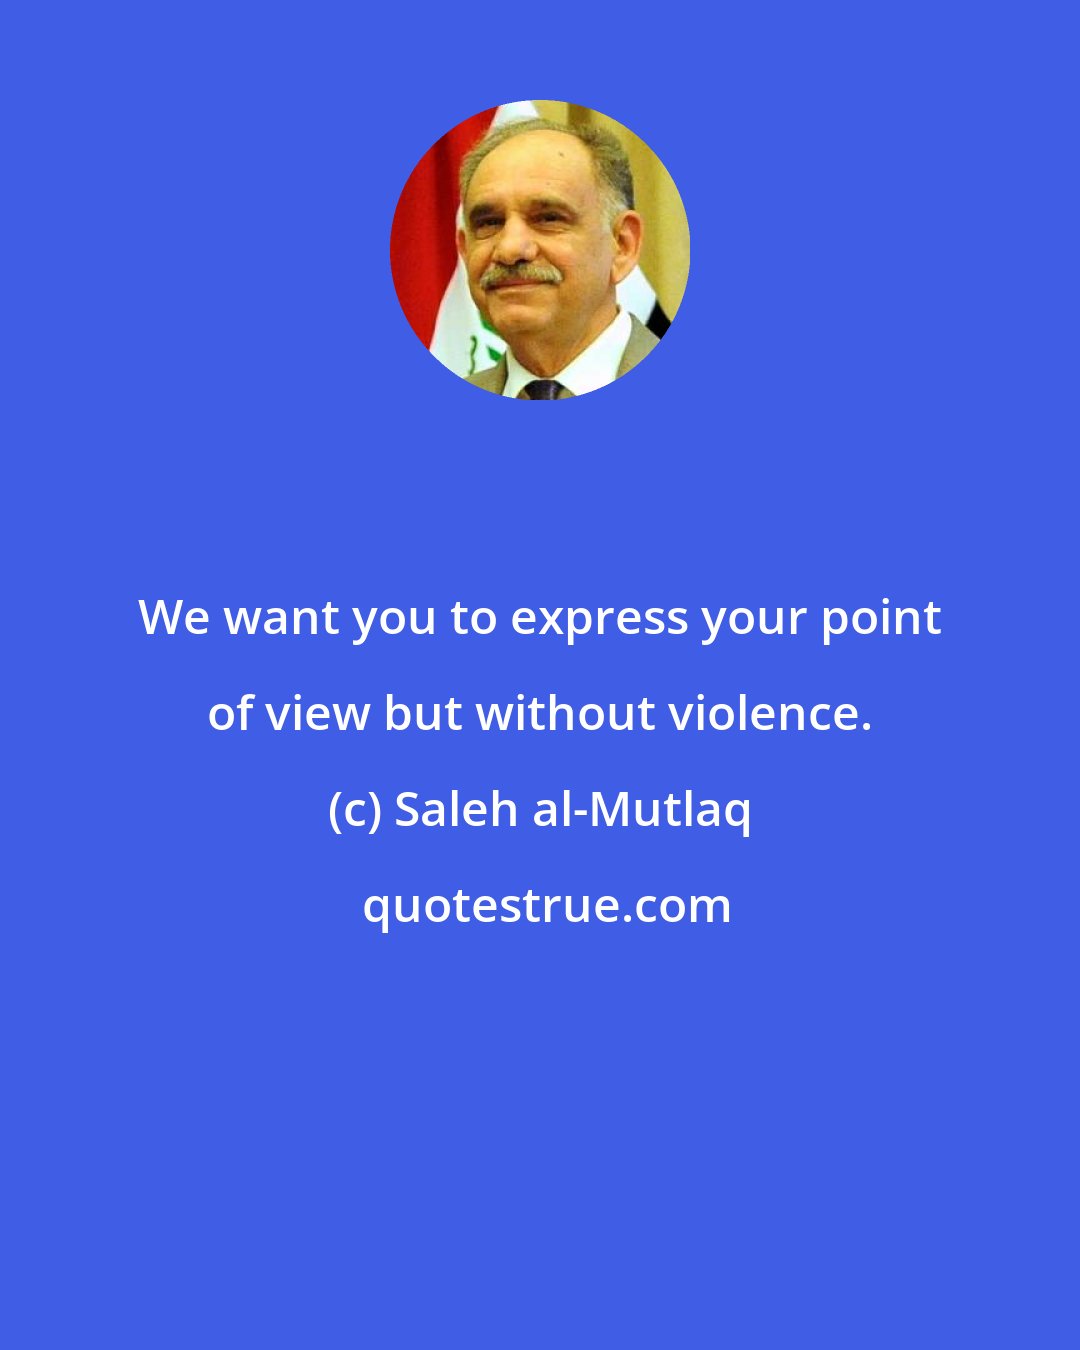 Saleh al-Mutlaq: We want you to express your point of view but without violence.